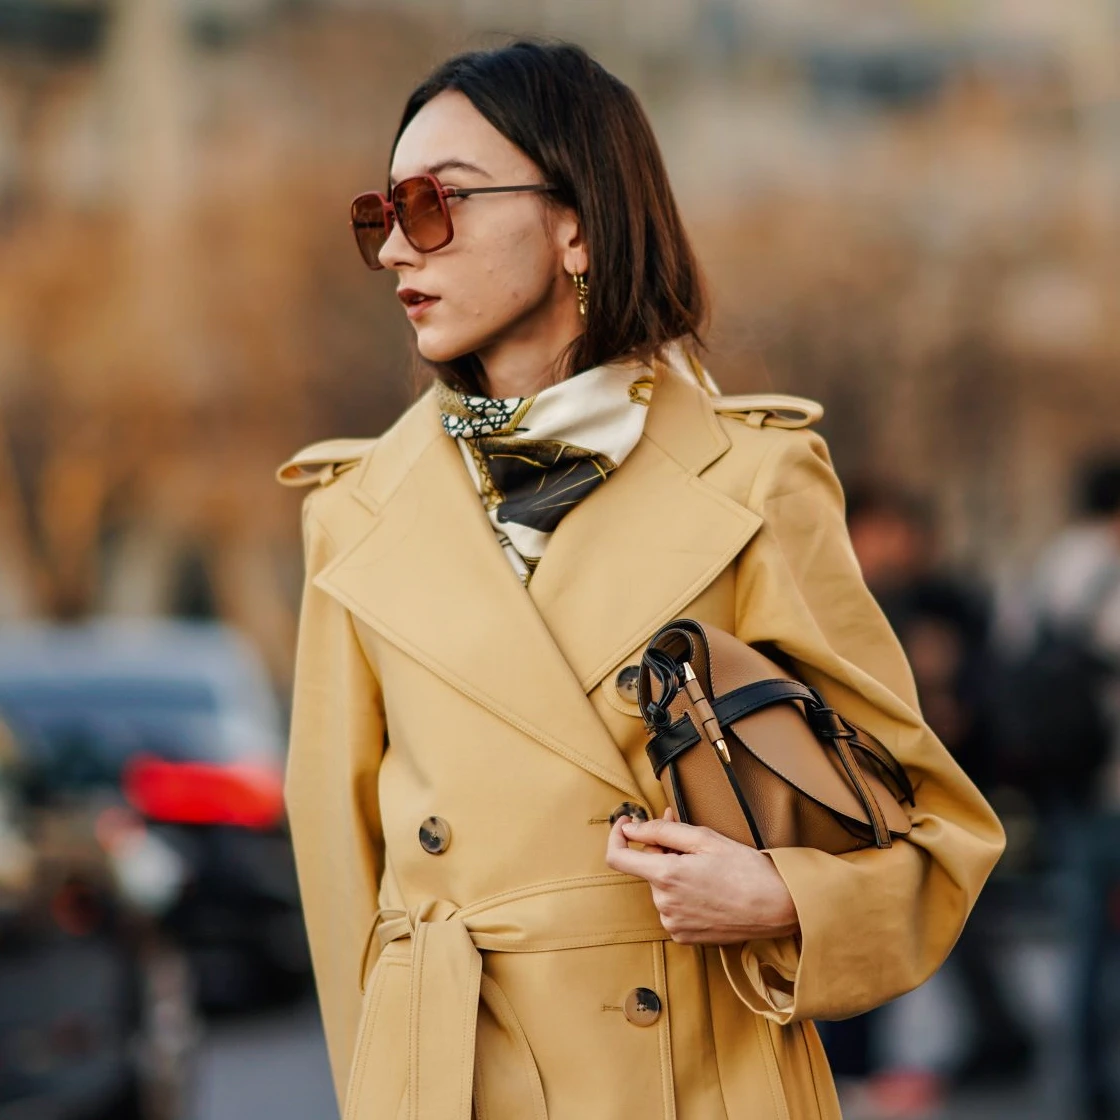 This sell-out ASOS trench coat has changed the way I dress